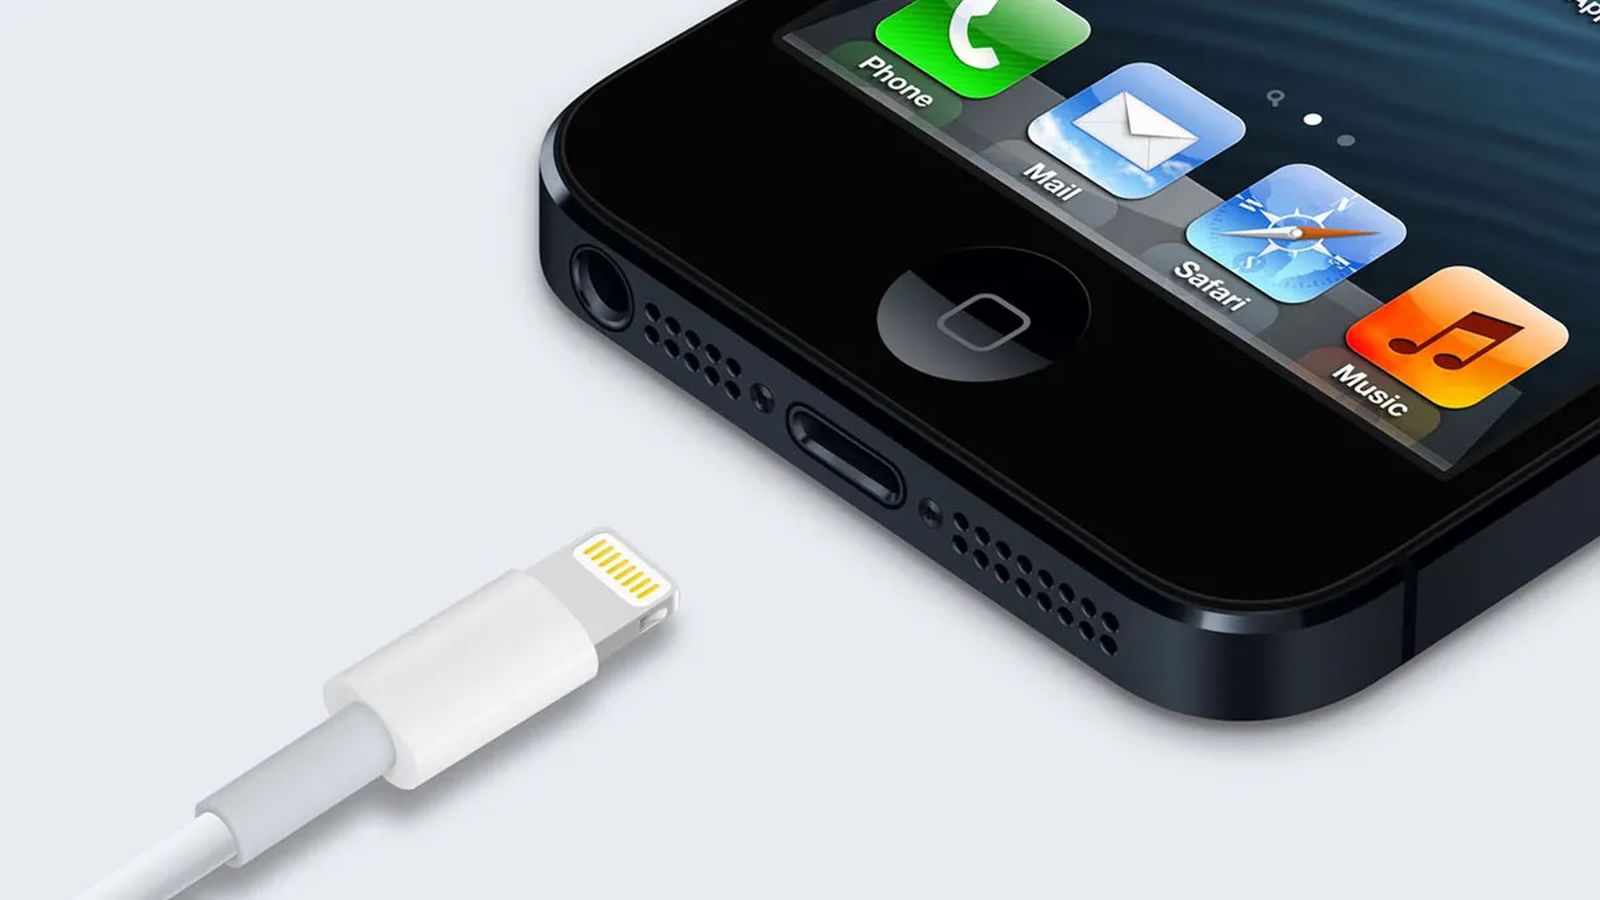 Lightning Connector Turns 10 Today as iPhone Rumored to Adopt USB-C Next Year